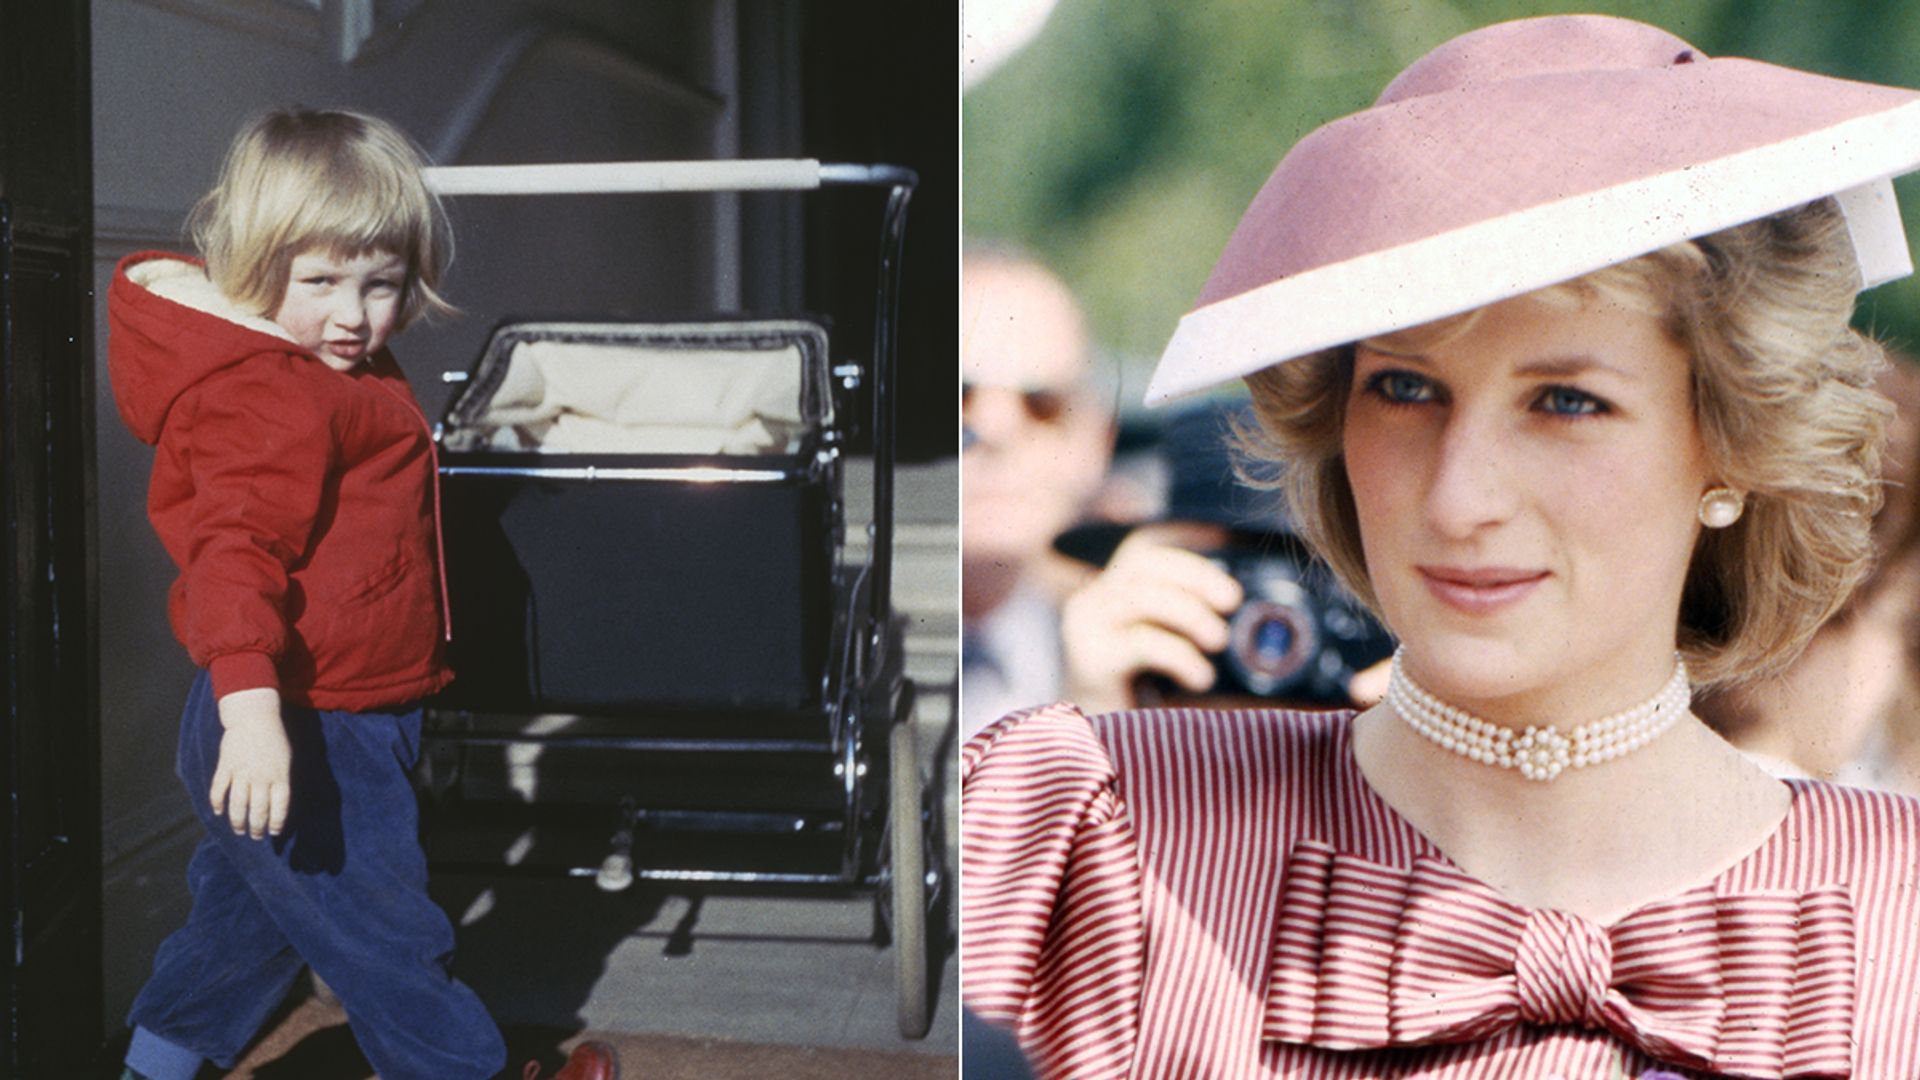 Split image of a young Princess Diana with a pram alongside an adult Princess Diana in a striped outfit